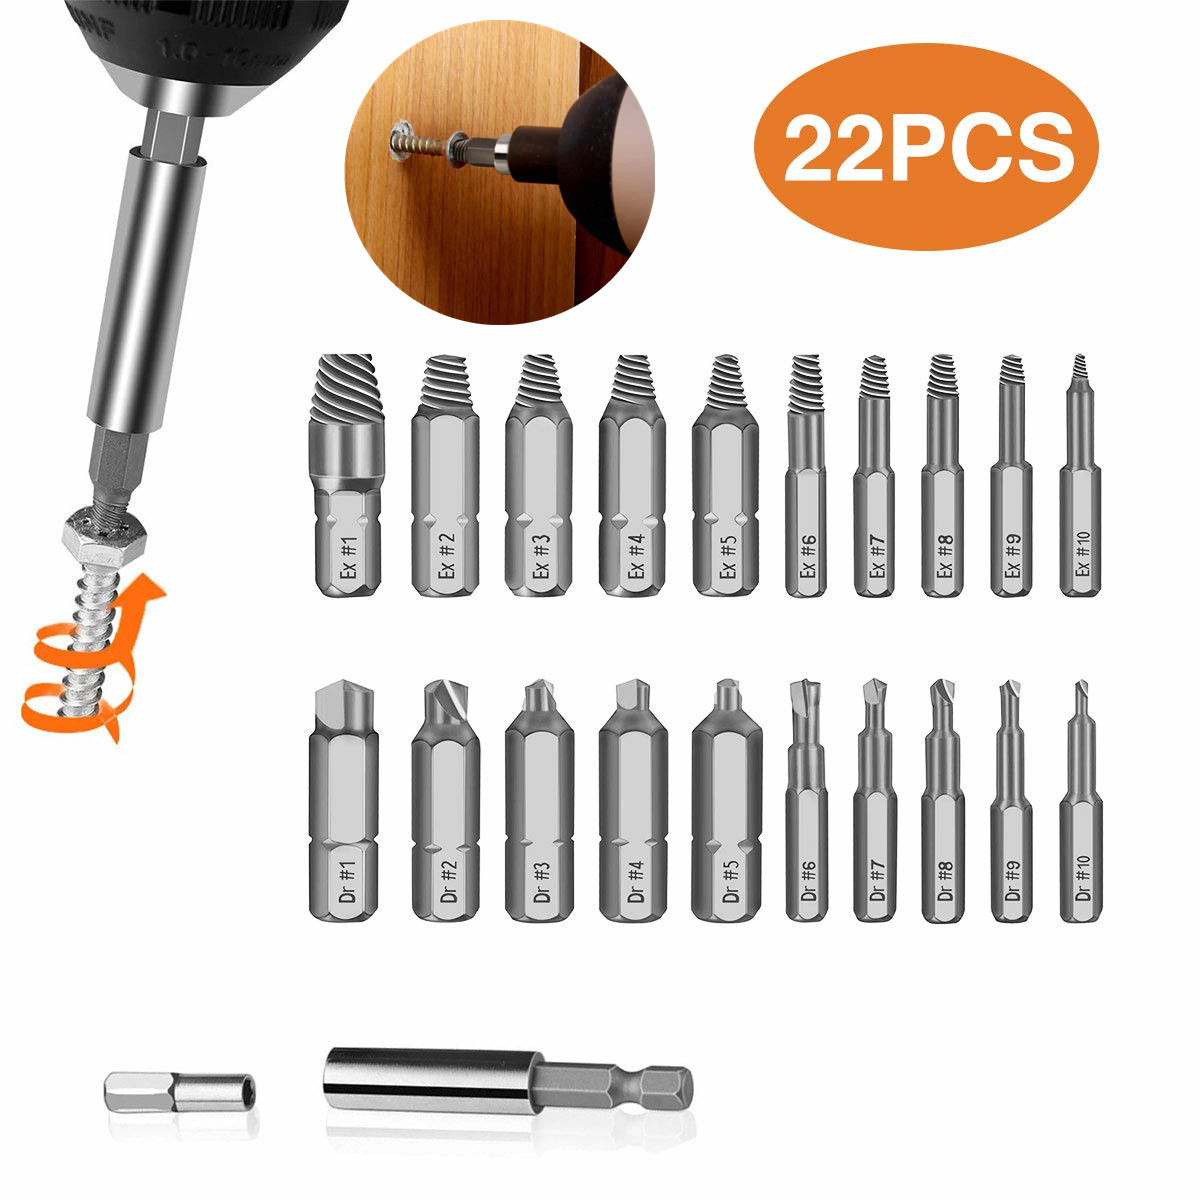 22PCS Damaged Screw Extractor Remove Set Broken Screw Or Bolt Stripped Remover 